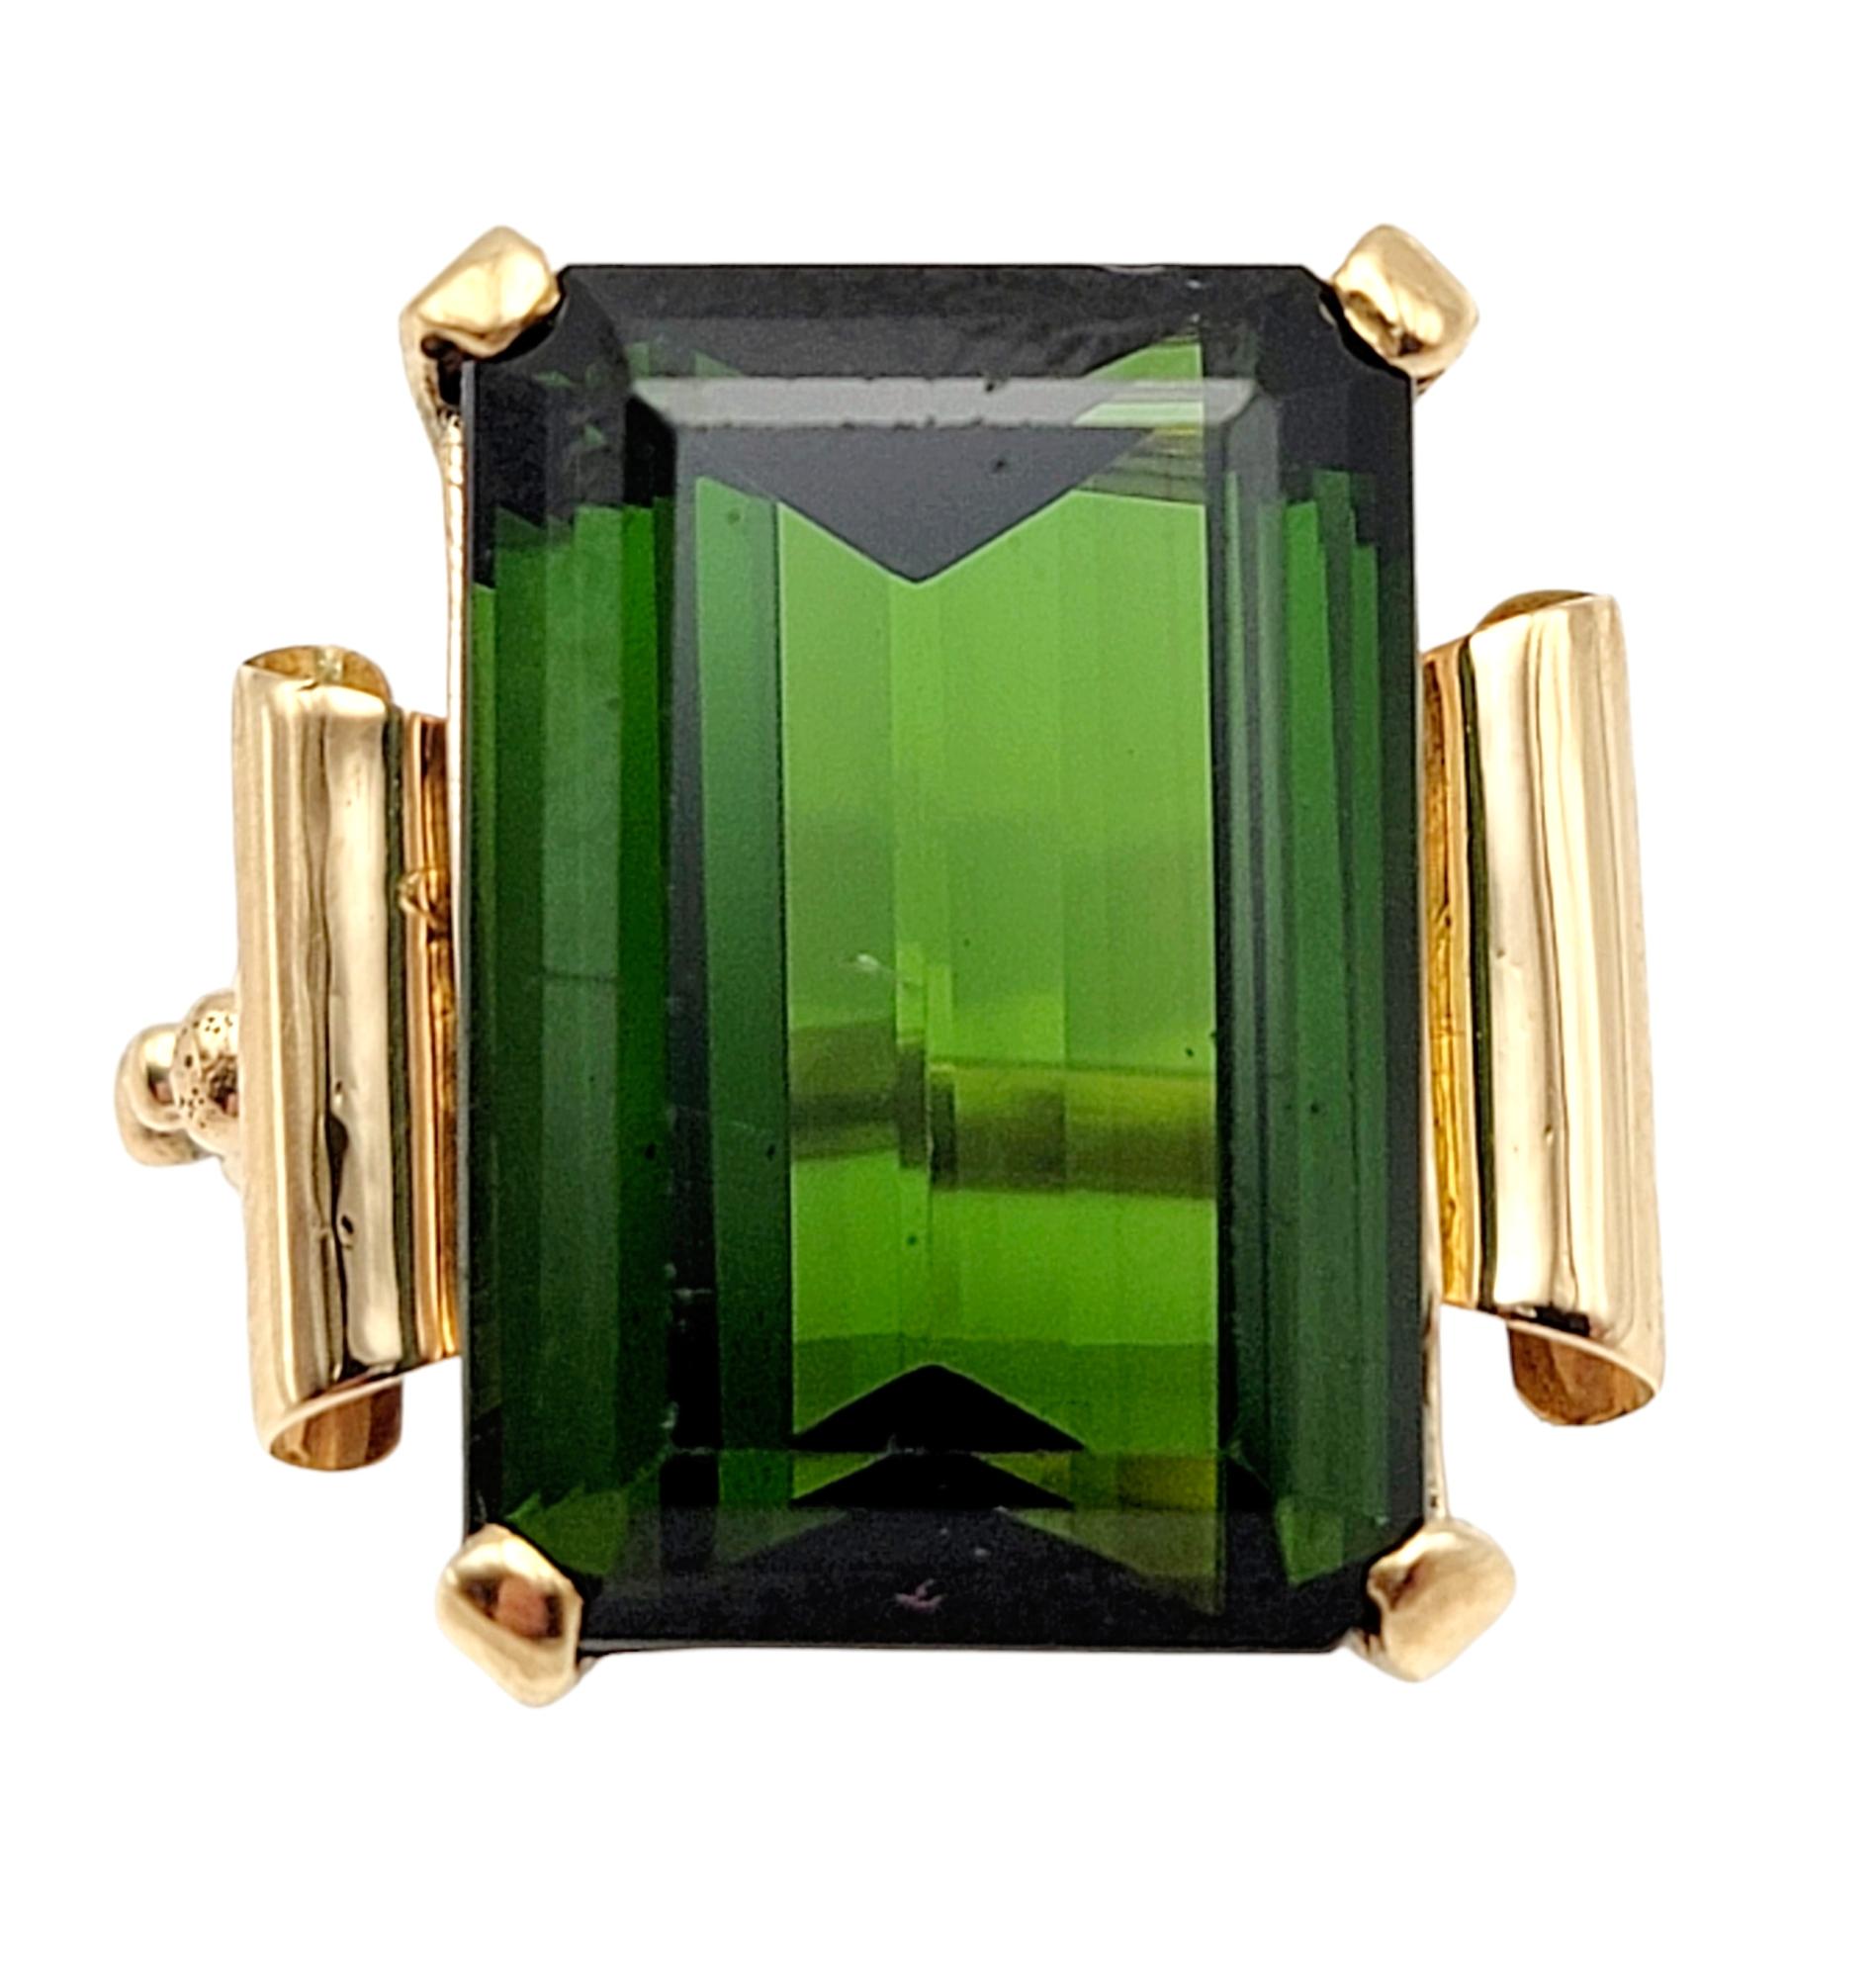 Ring size: 5.25

Amazingly gorgeous vintage cocktail ring featuring a single green tourmaline stone. This eye-catching piece makes a big statement with its impressive size and exquisite color. The huge 15.58 carat emerald cut solitaire tourmaline